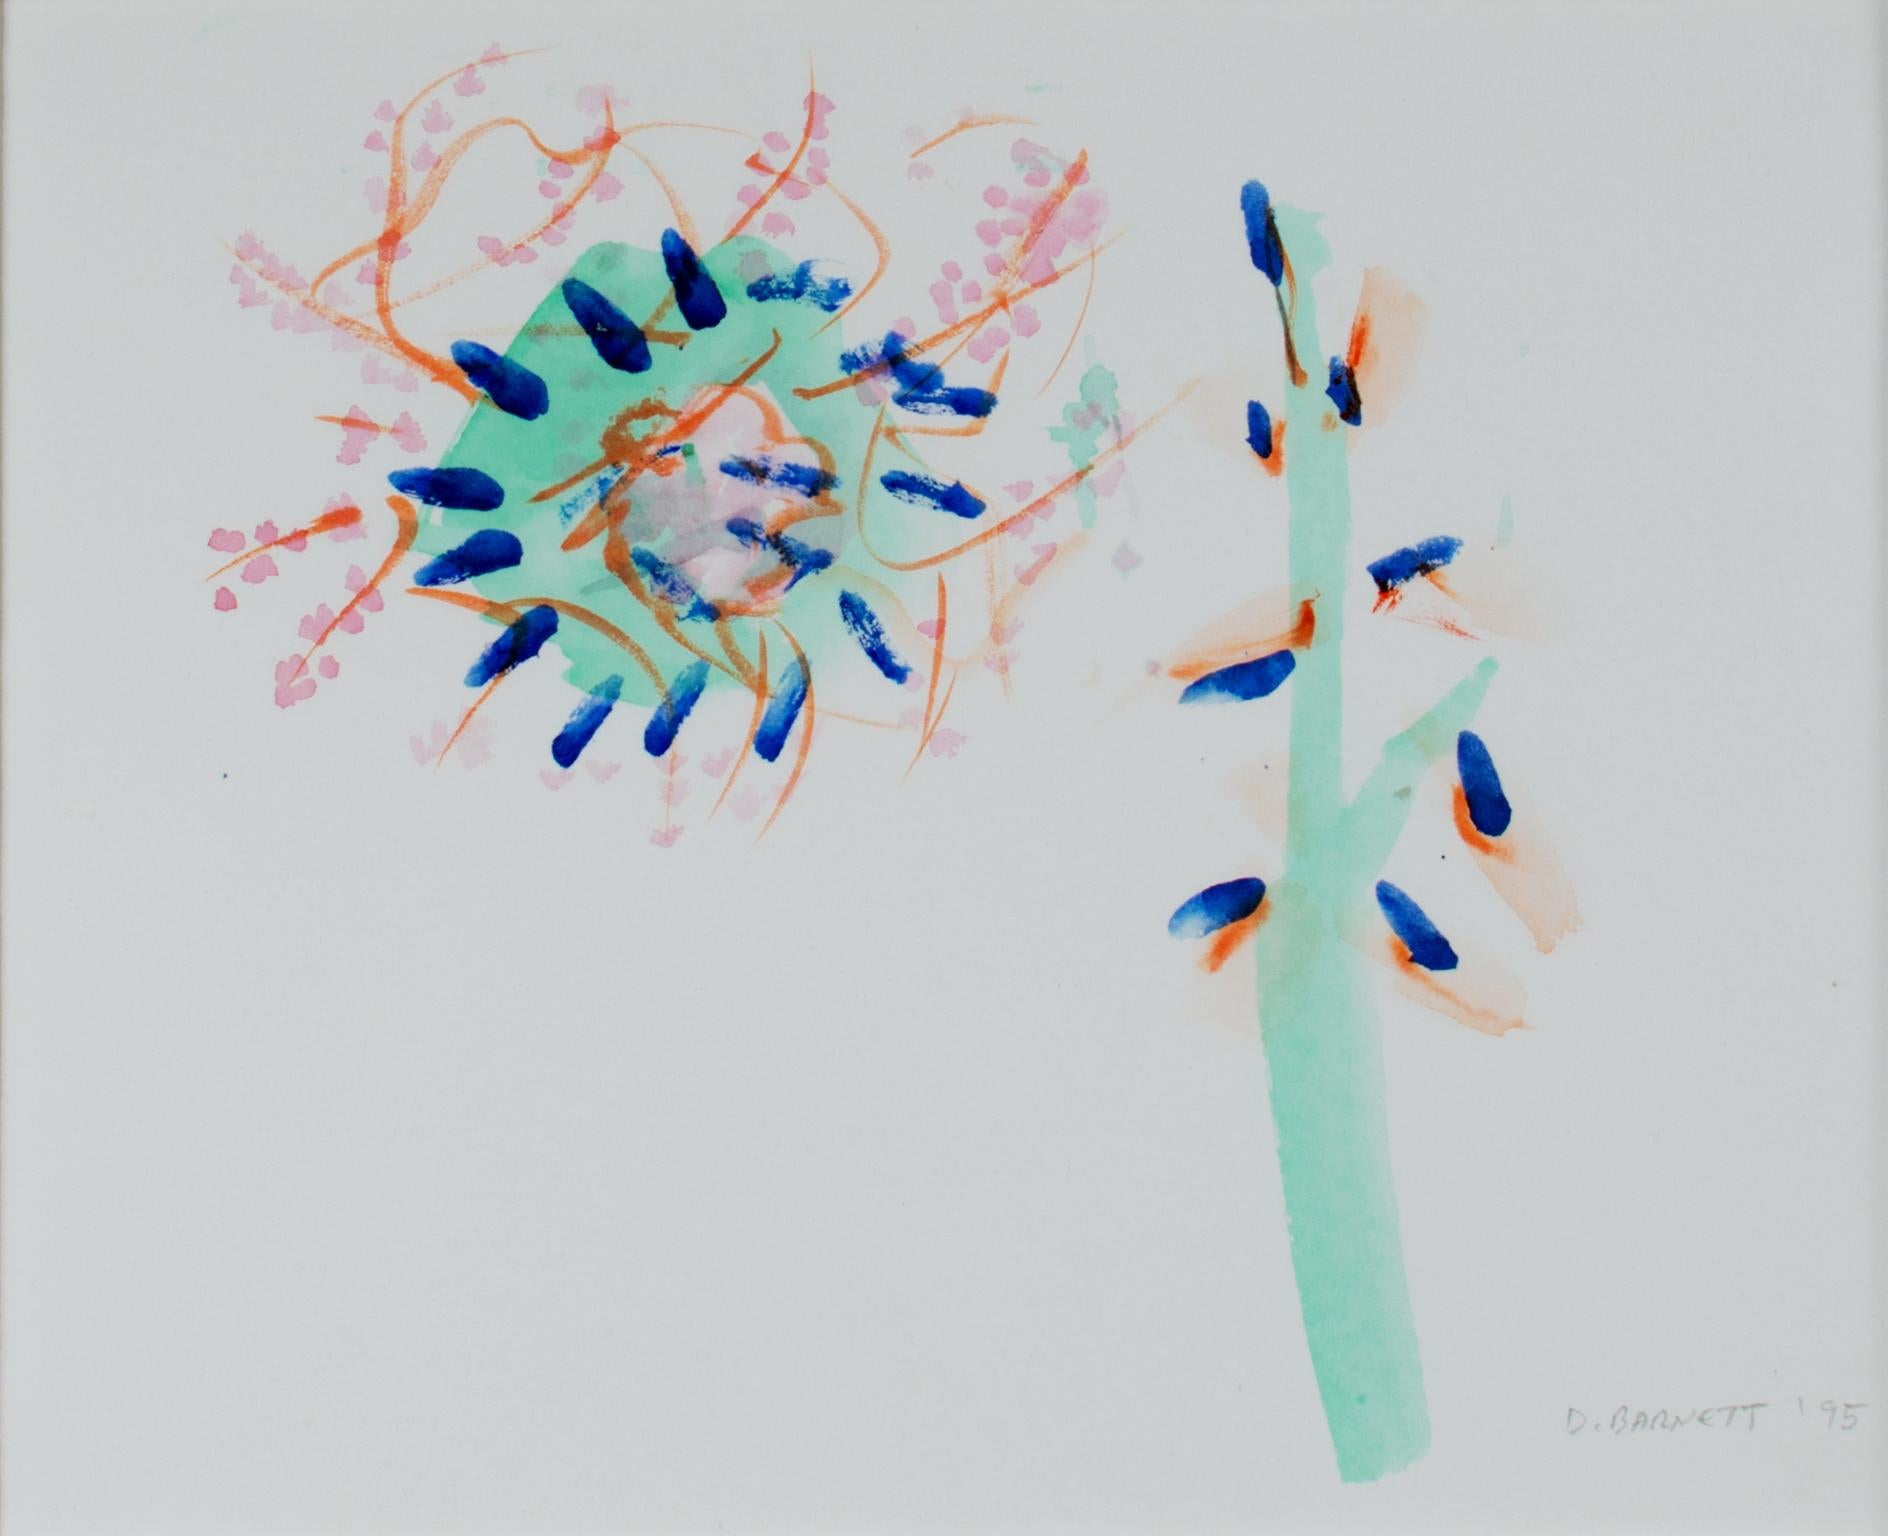 "Flowers & Branch" is an original watercolor by David Barnett, signed in the lower right corner. It features an abstract stem with orange and blue flower buds, plus an enlarged view of an open flower.

Art size: 9" x 11"
Frame size: 17" x 19"

David